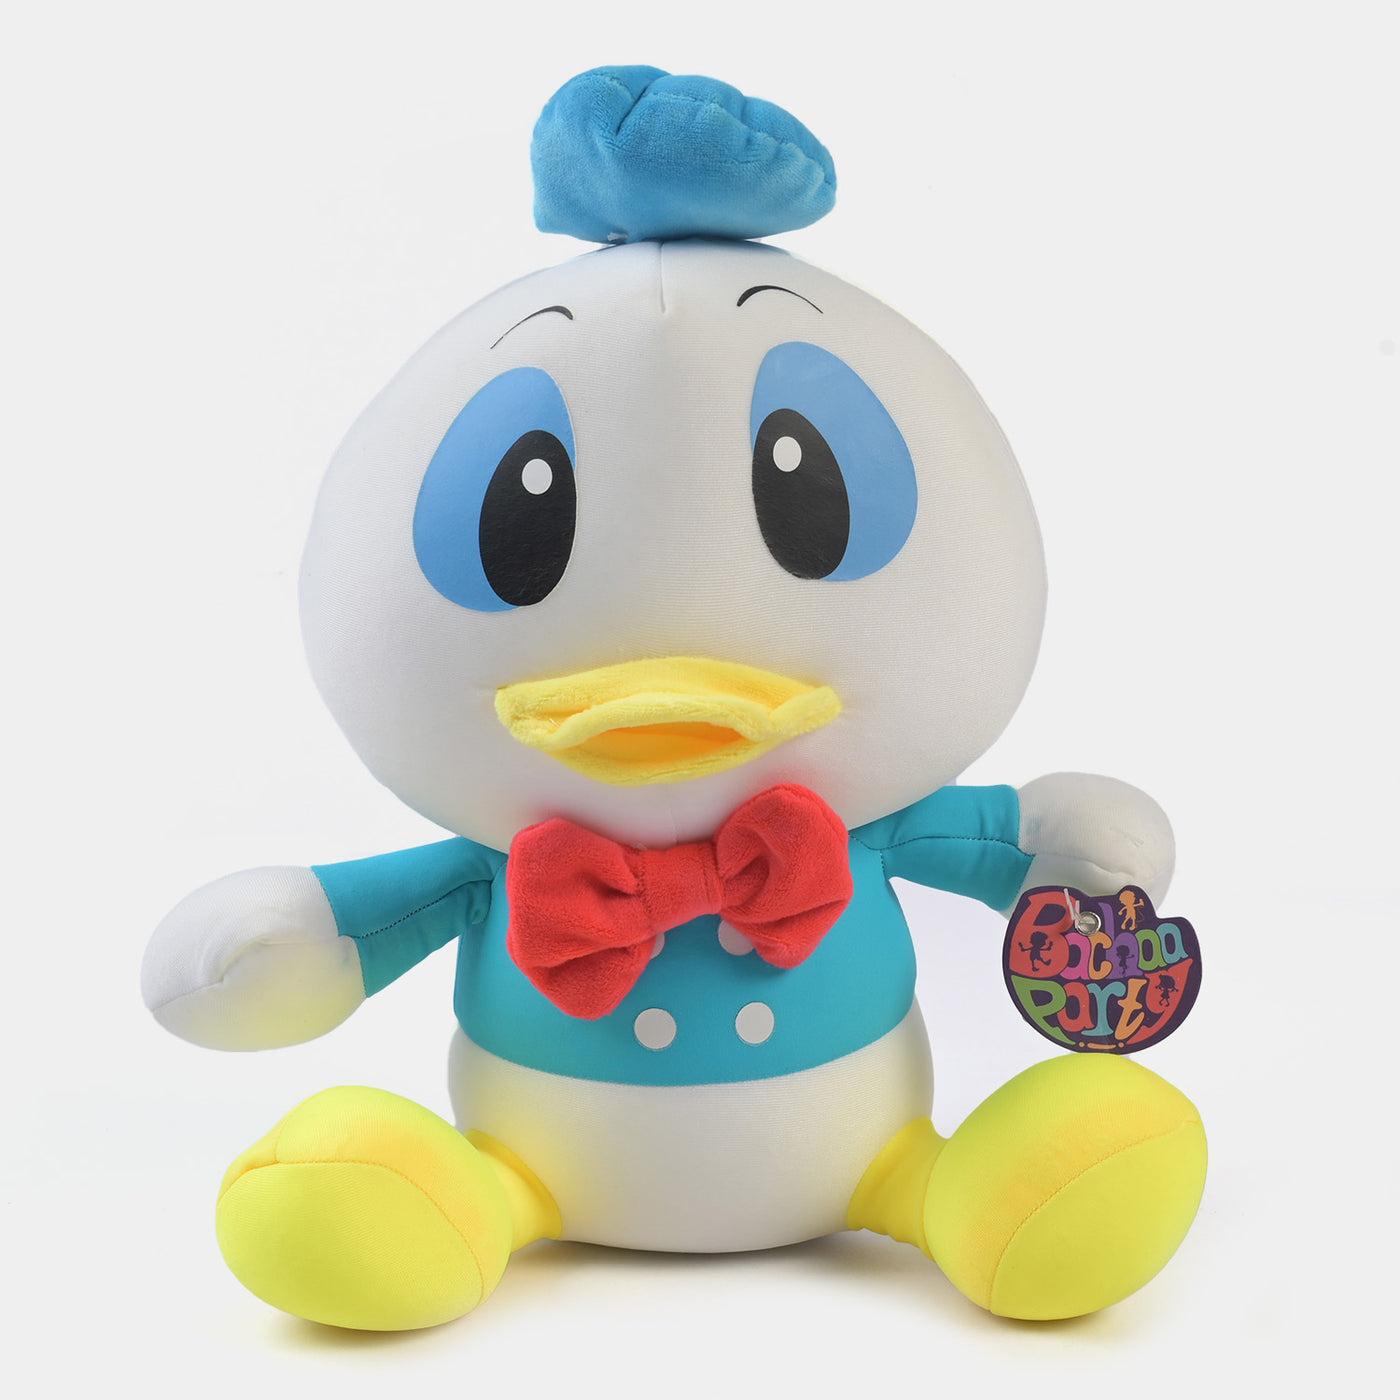 Soft Beans Duck Toy For Kids